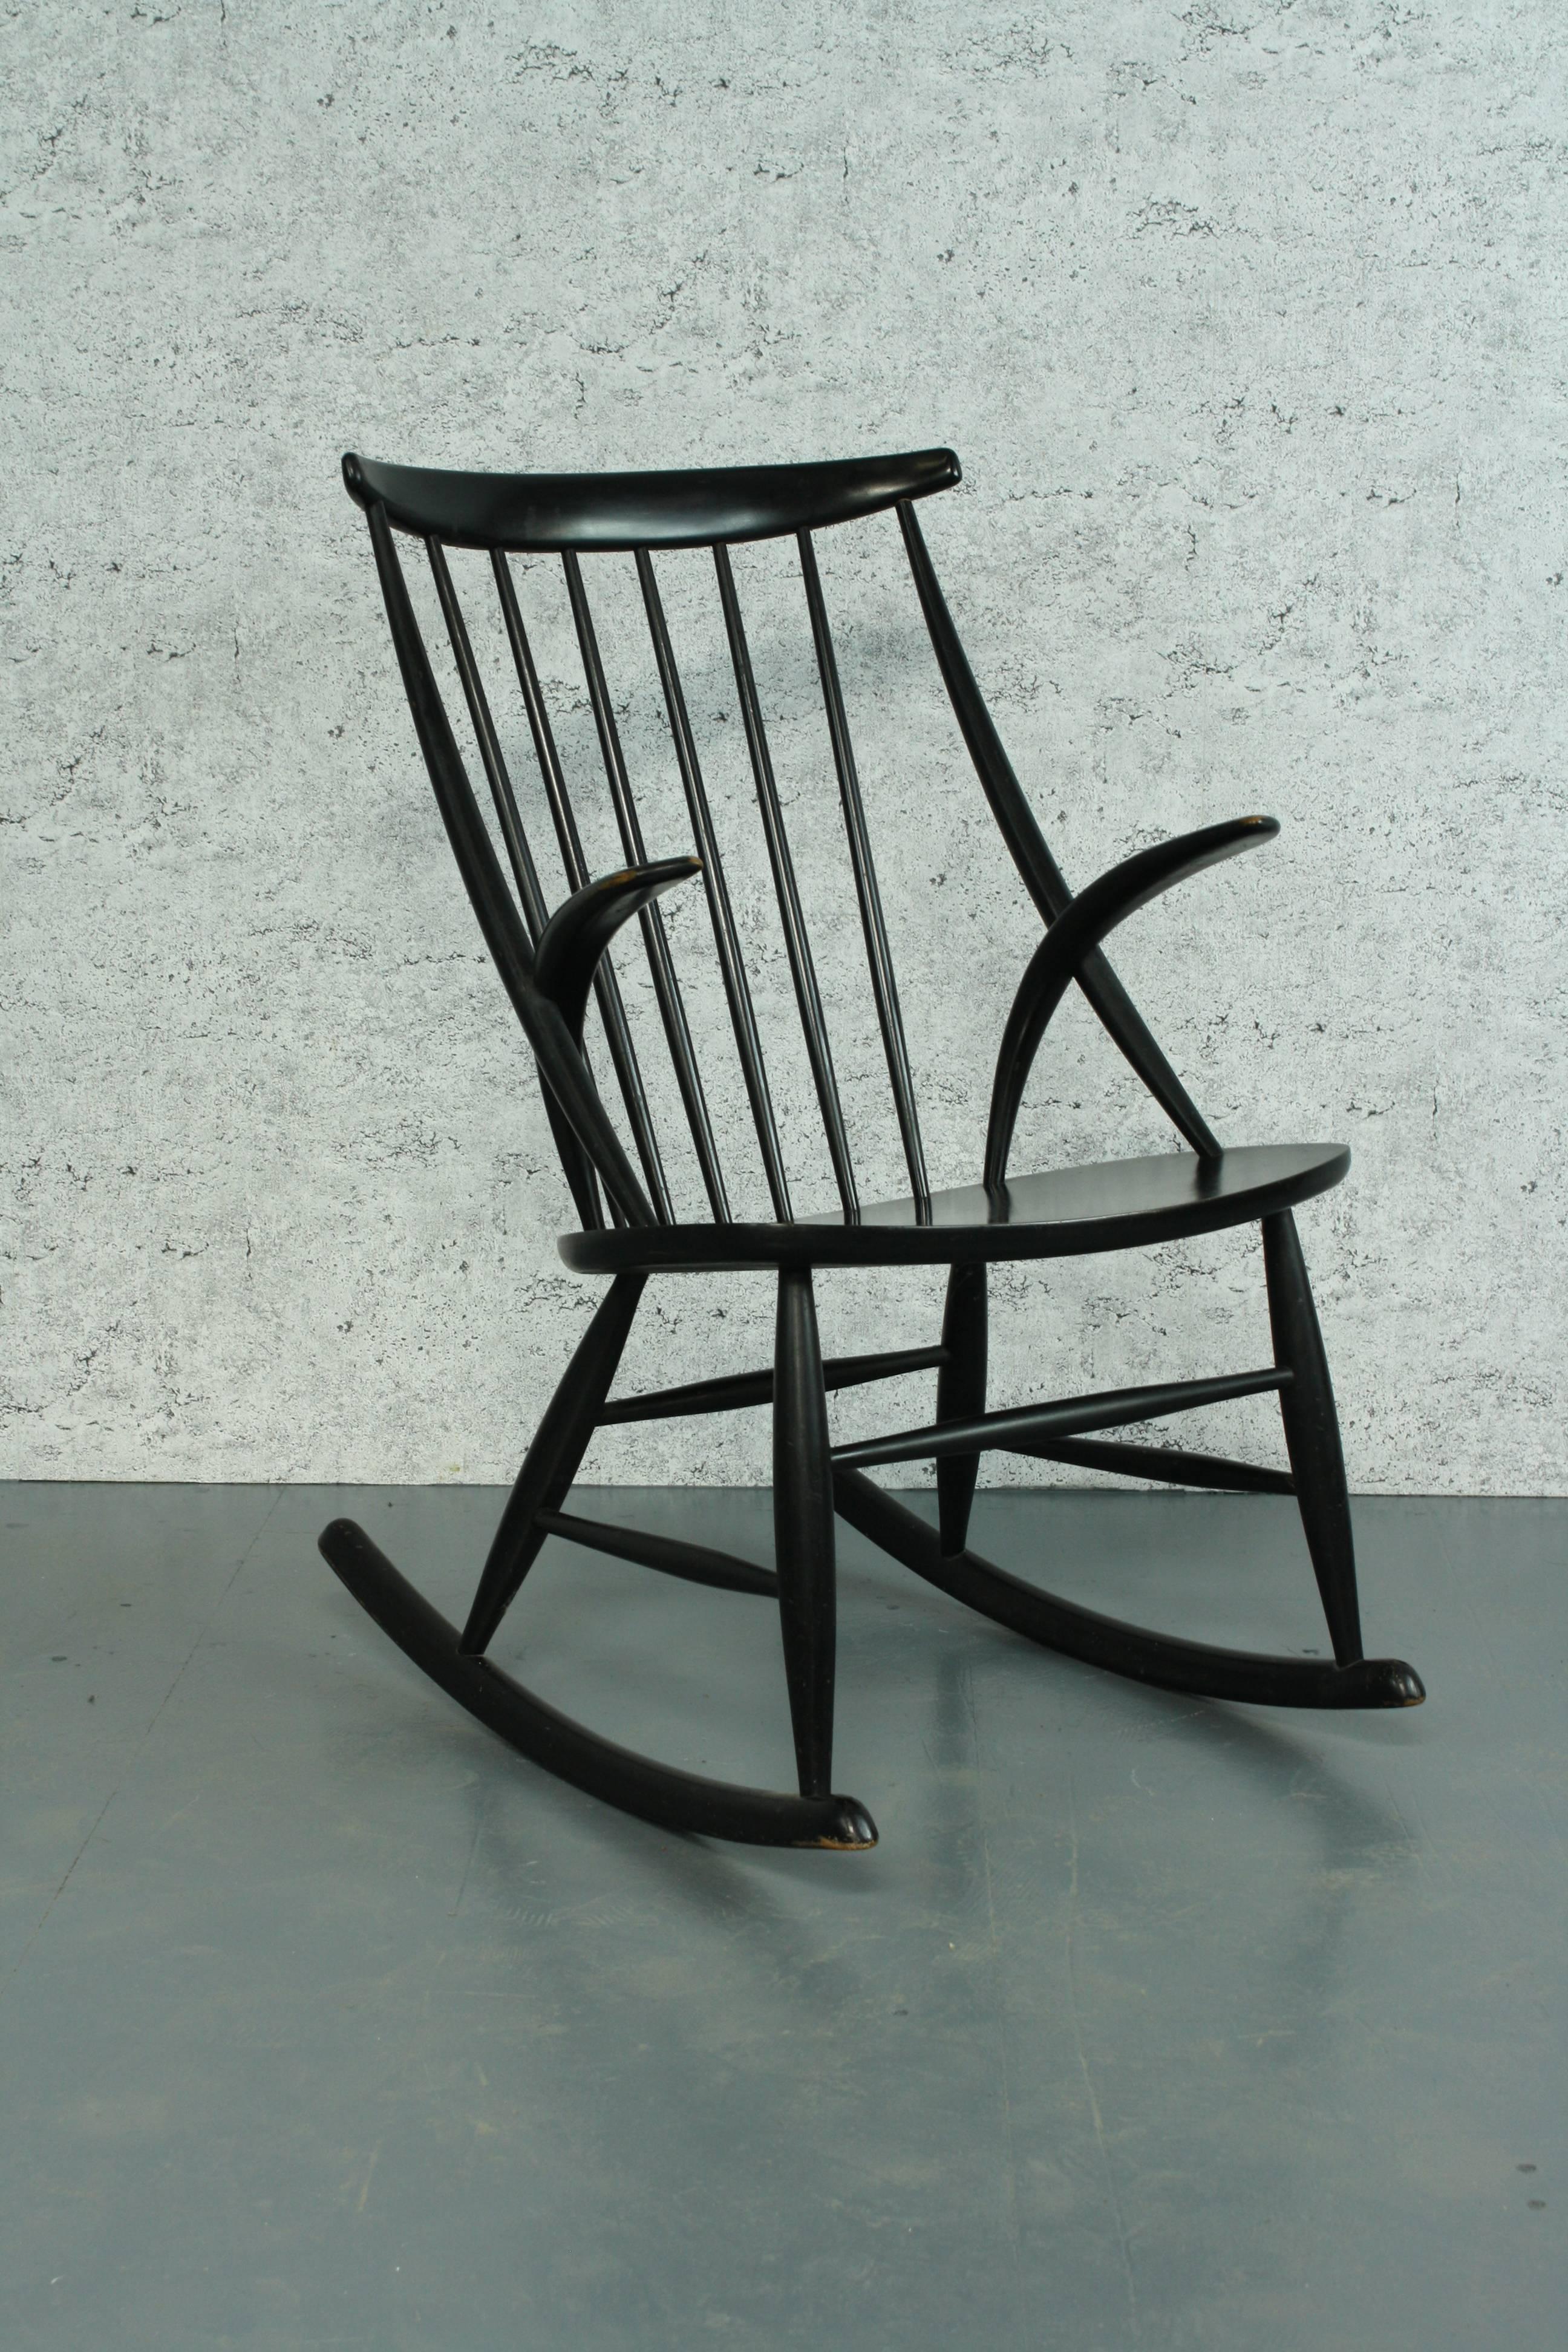 Lovely vintage Illum Wikkelso rocking chair made of black ebonized solid timber by Eilersen in circa 1958.

In good vintage condition; some signs of wear and tear, commensurate with age, but nothing which detracts.

Measures: Seat height